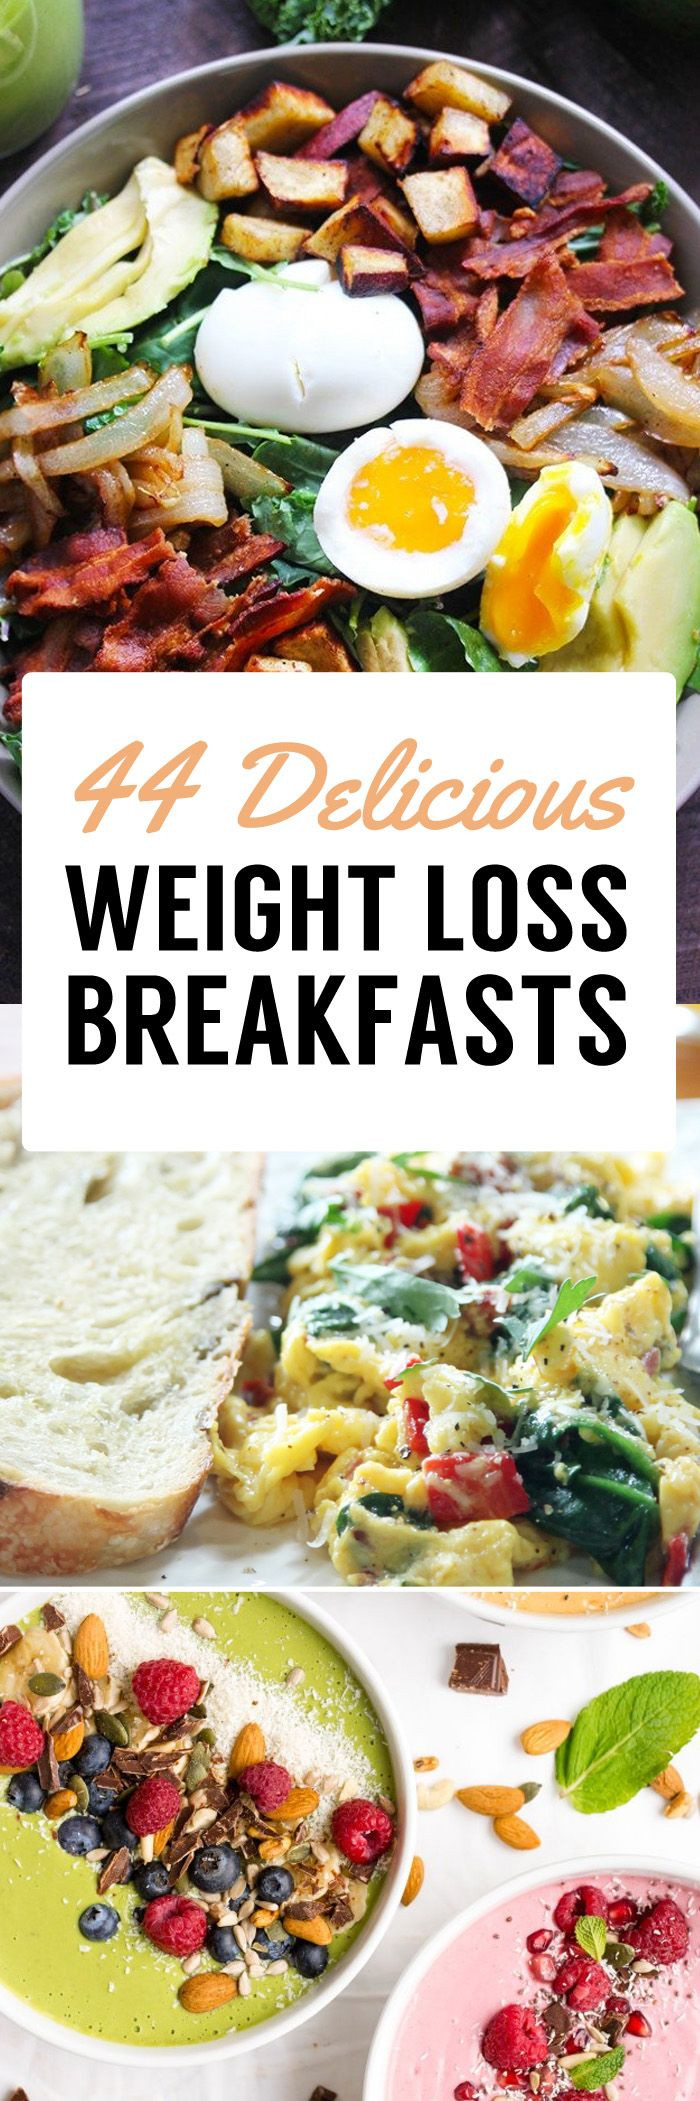 Best Healthy Breakfast For Weight Loss
 The 25 best Weight loss meals ideas on Pinterest